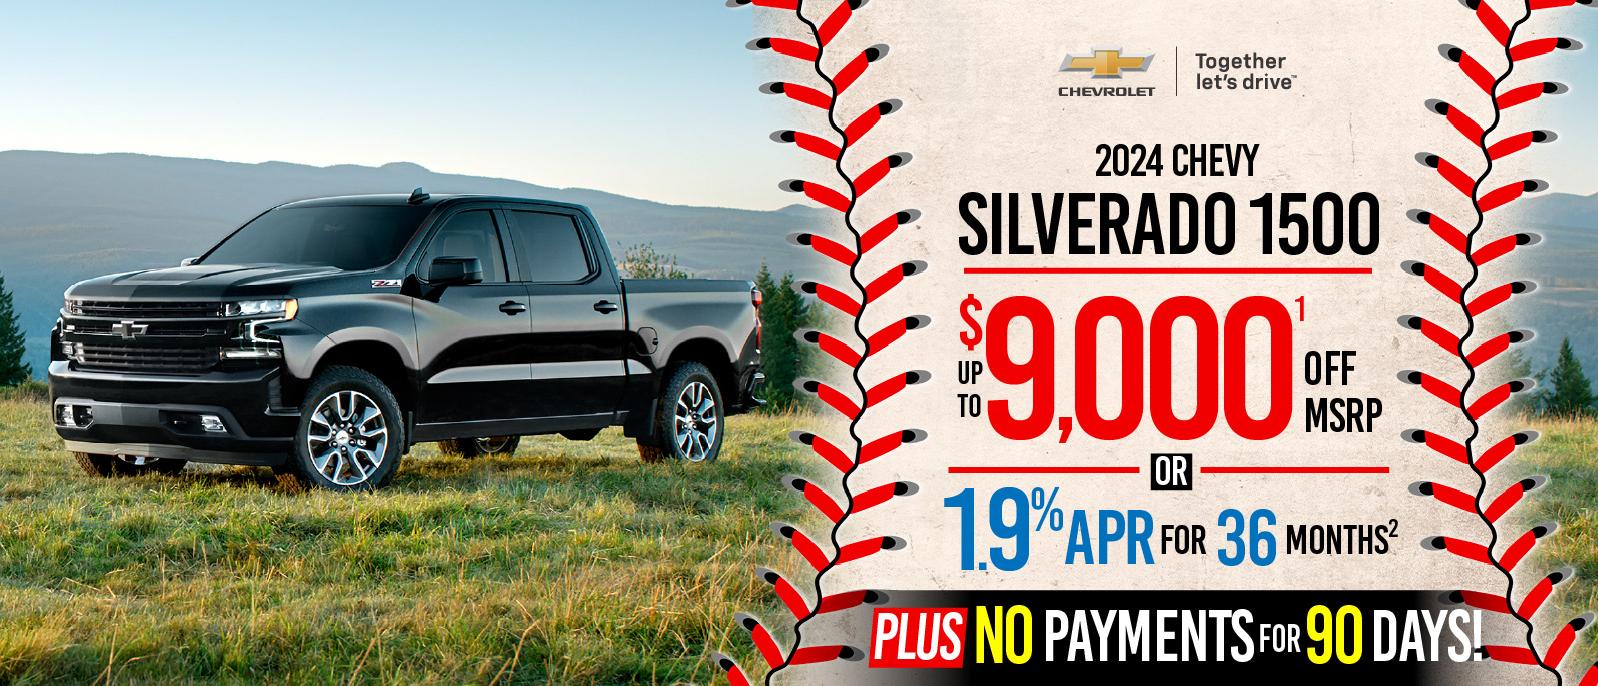 NEW Chevy Silverado 1500 - save up to $9000 or 1.9% APR for 36 months